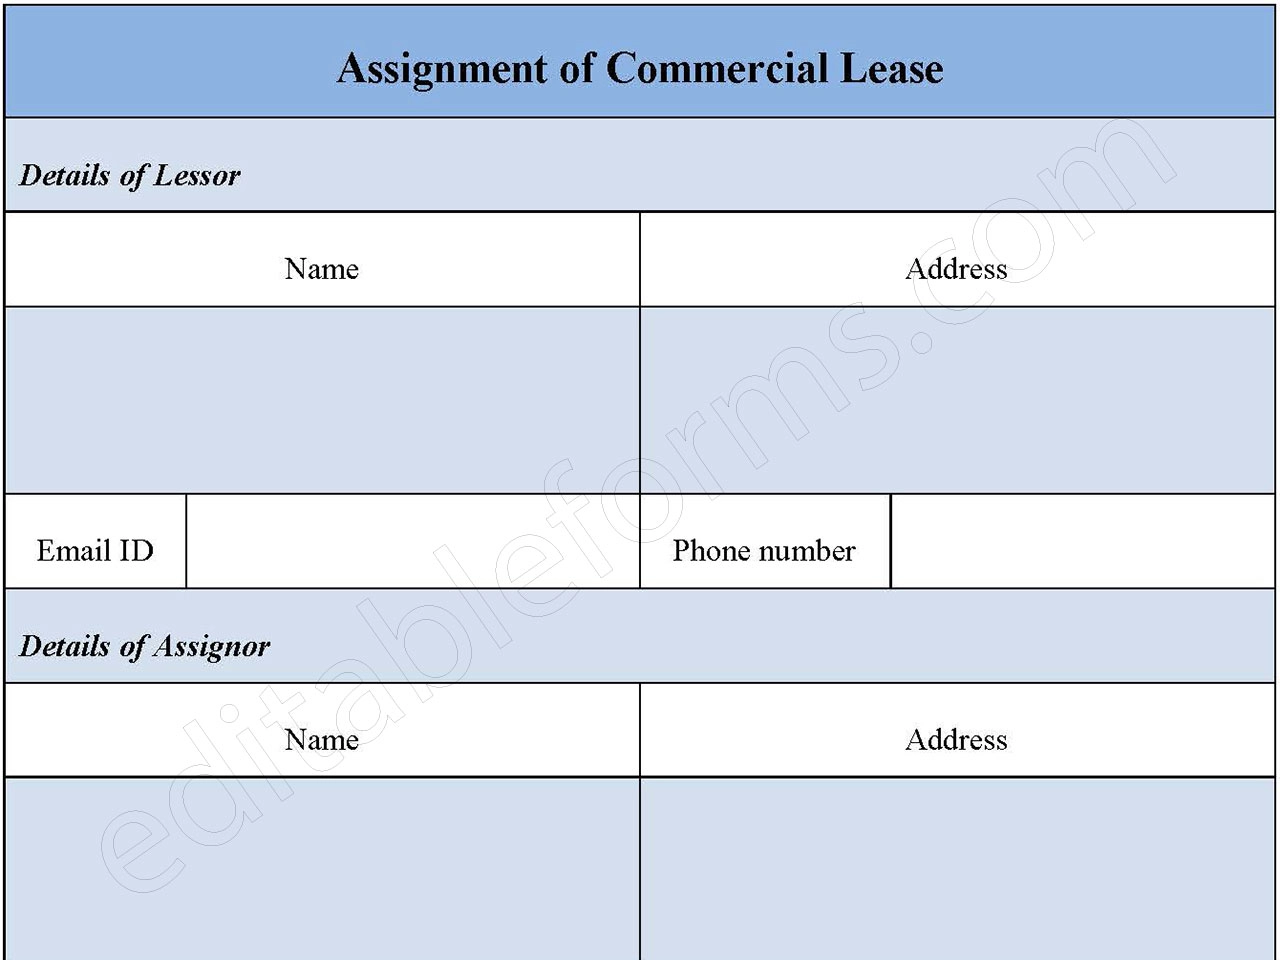 Assignment of Commercial Lease Form